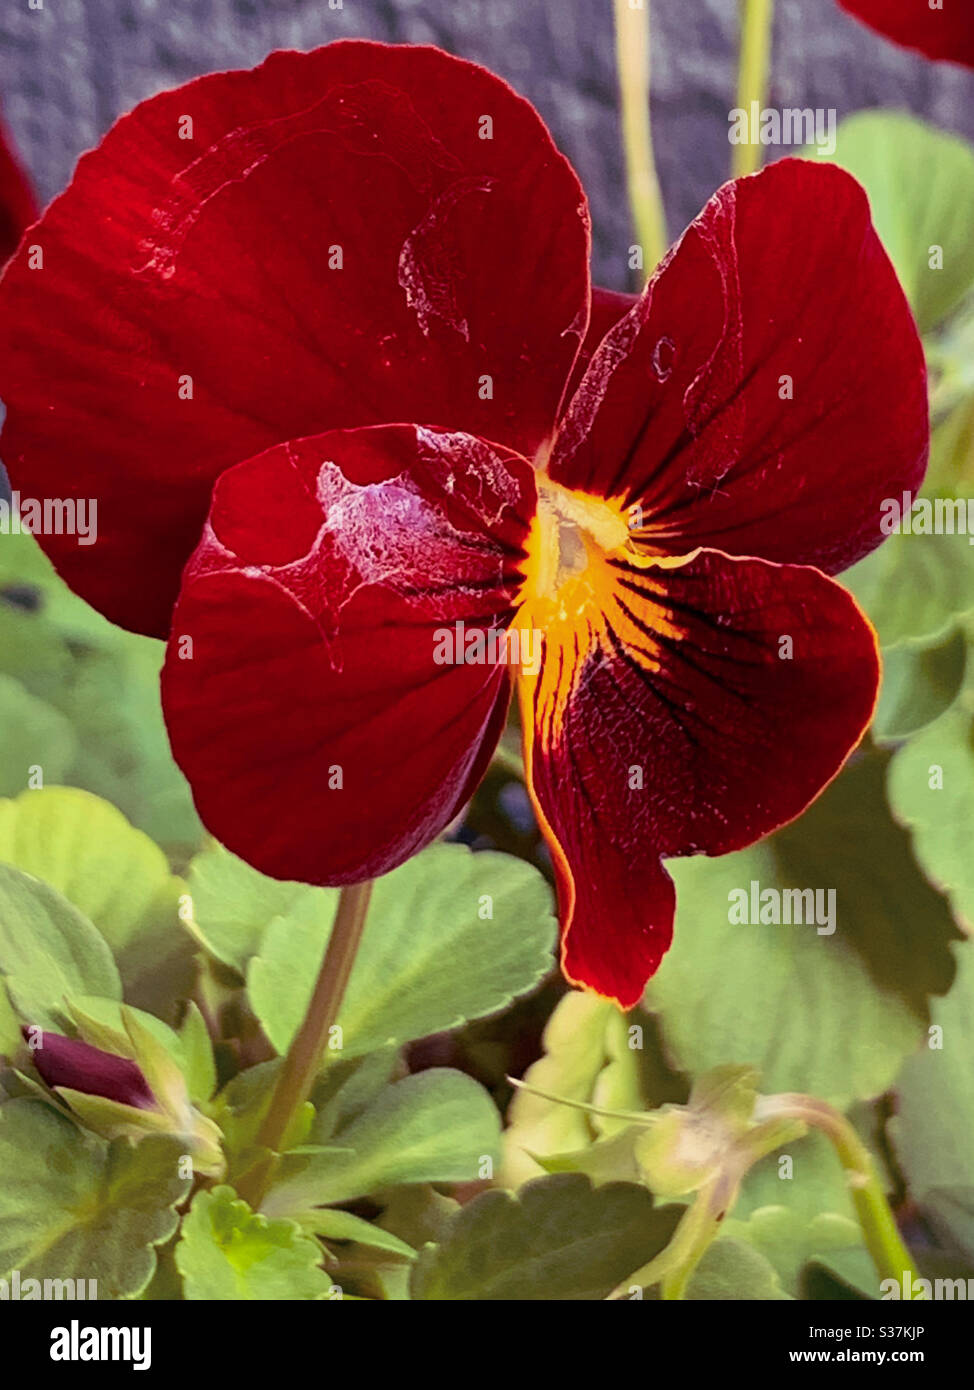 Red pansy flower with snail trail in evidence Stock Photo